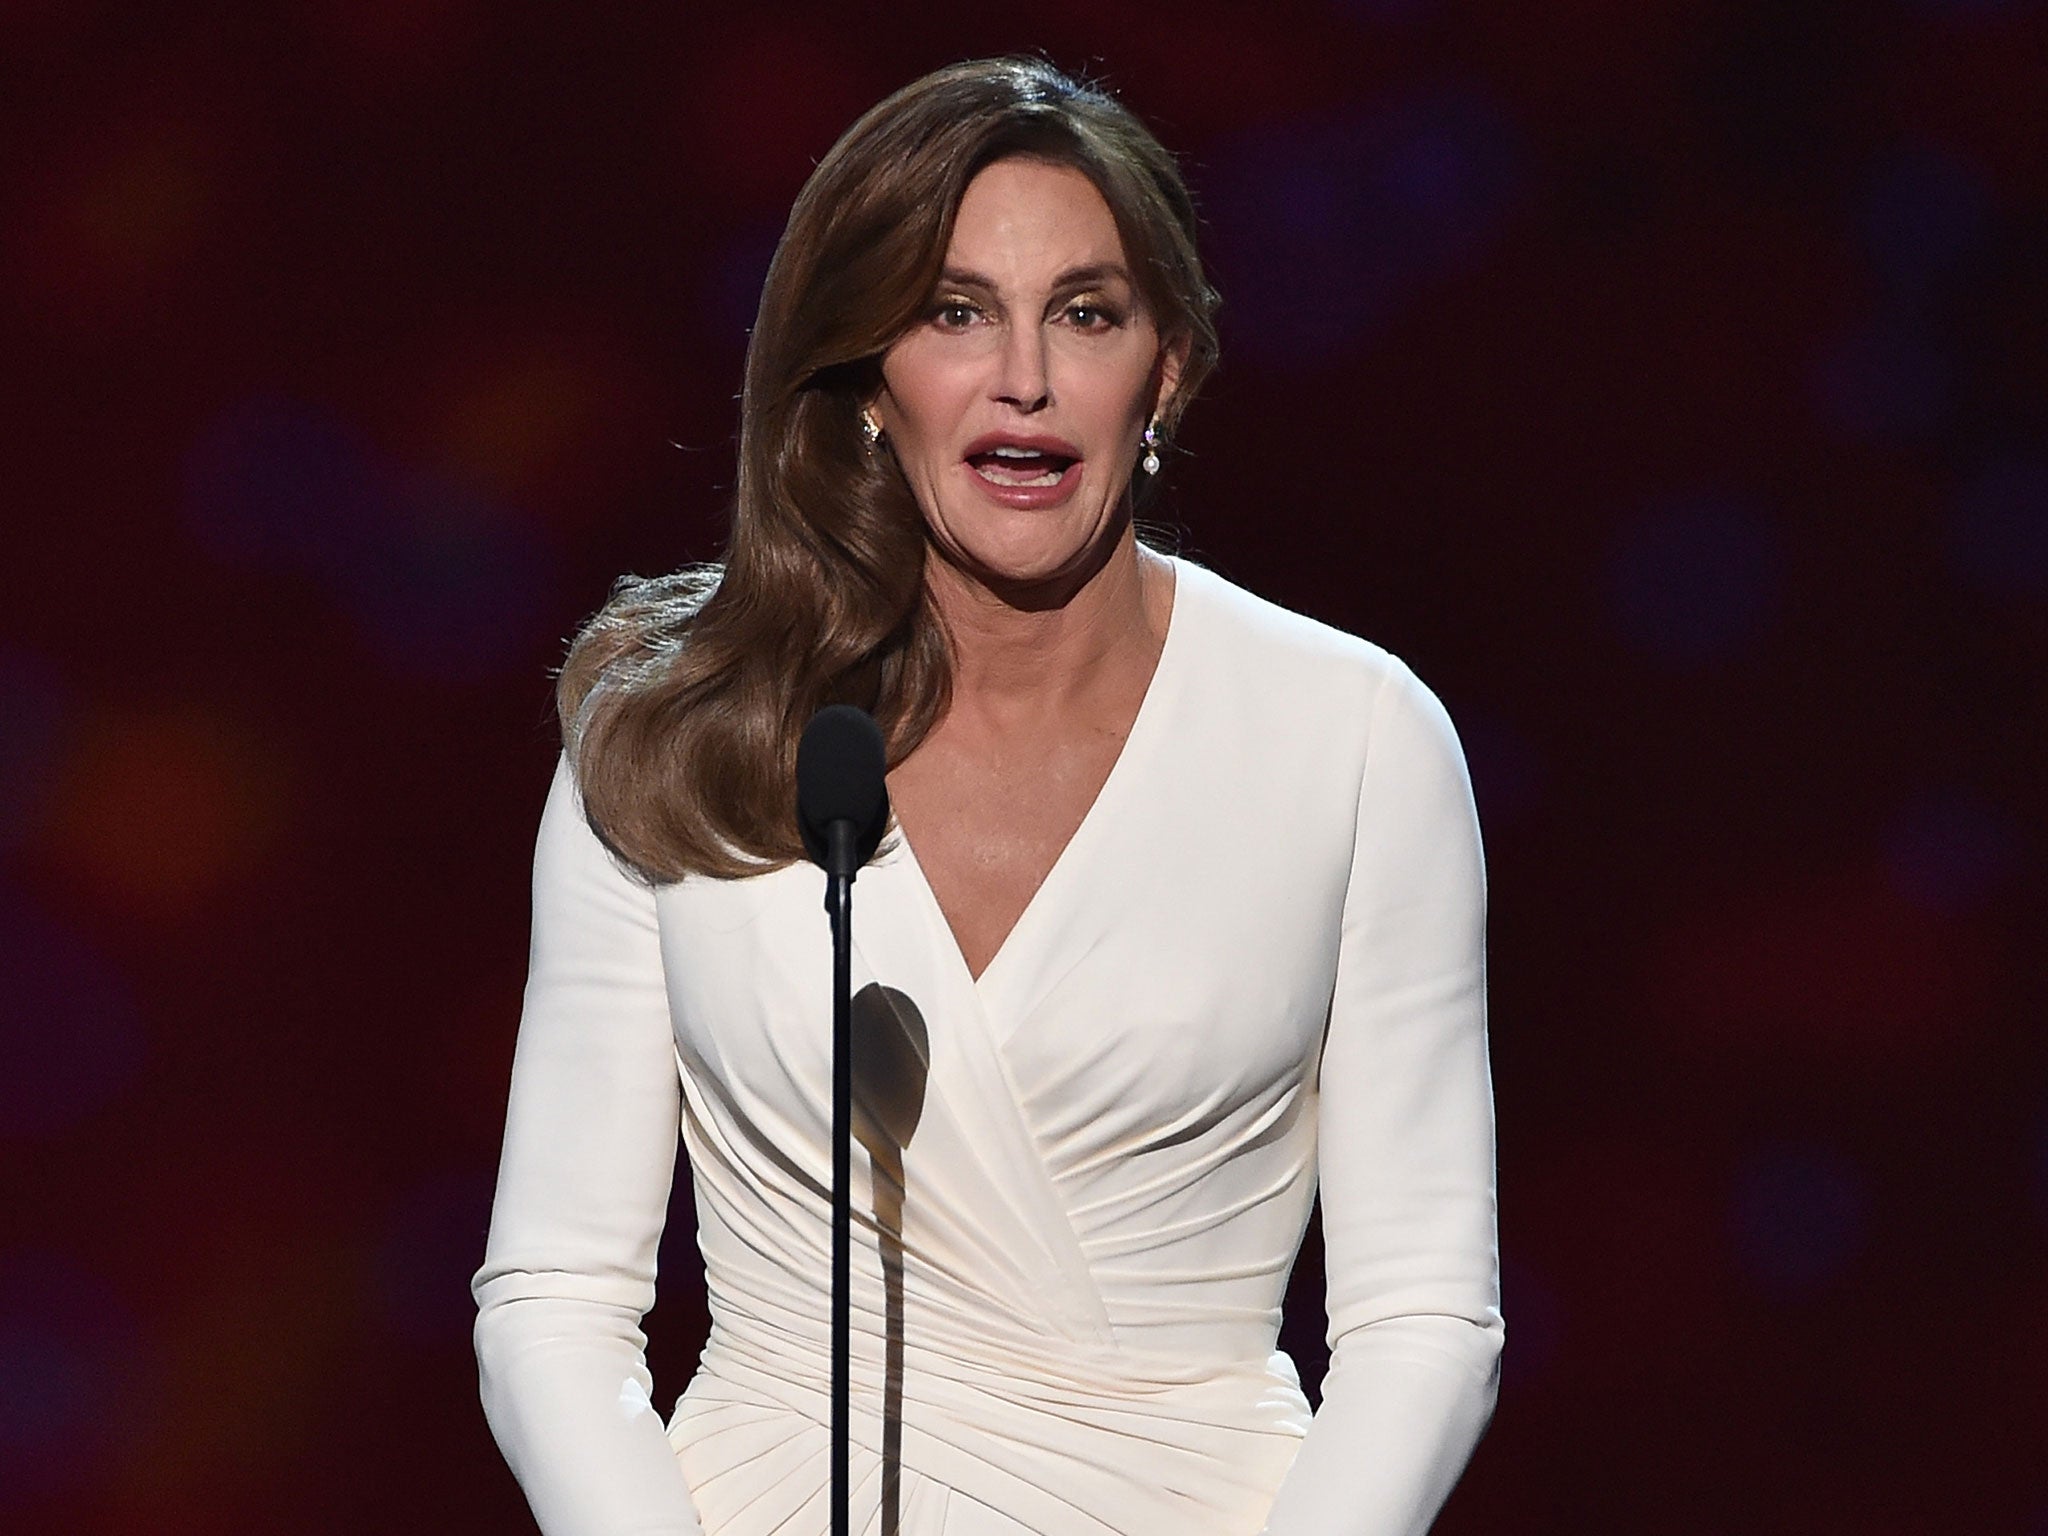 Say my name: Caitlyn Jenner accepting a courage award this week